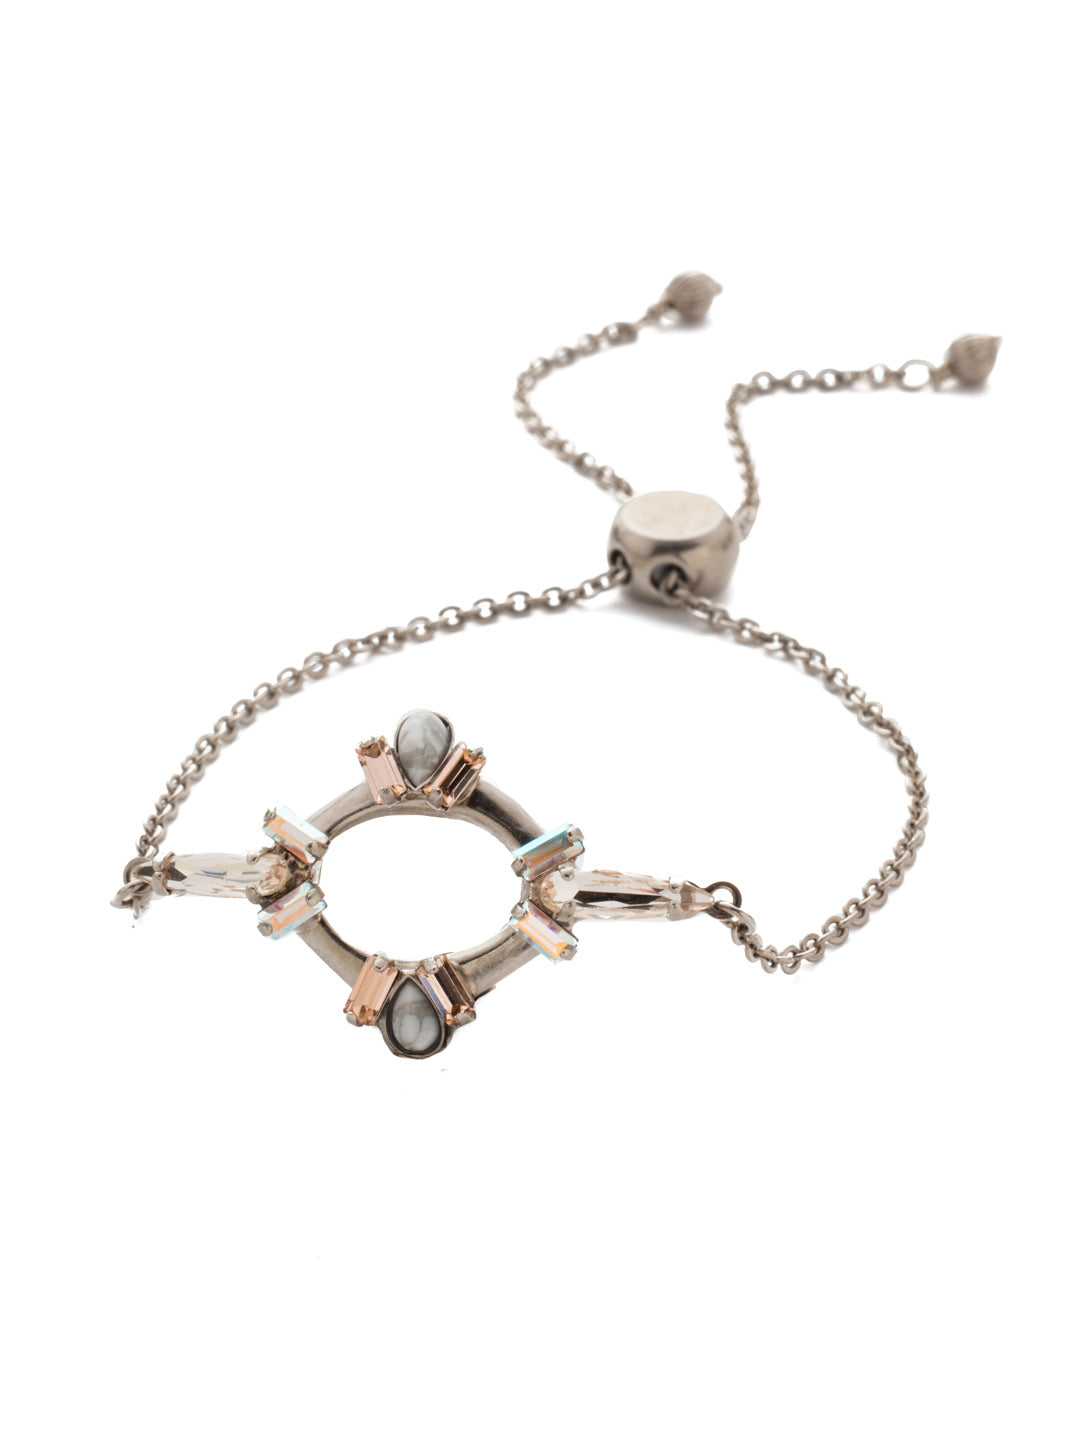 Nevaeh Adjustable Slider Bracelet - BEA23ASSCL - A modern yet elegant center piece design adorned with a variety of crystals centers this slider bracelet, which can be easily adjusted to your desired fit. Perfect to pair with other bracelets or to wear alone.